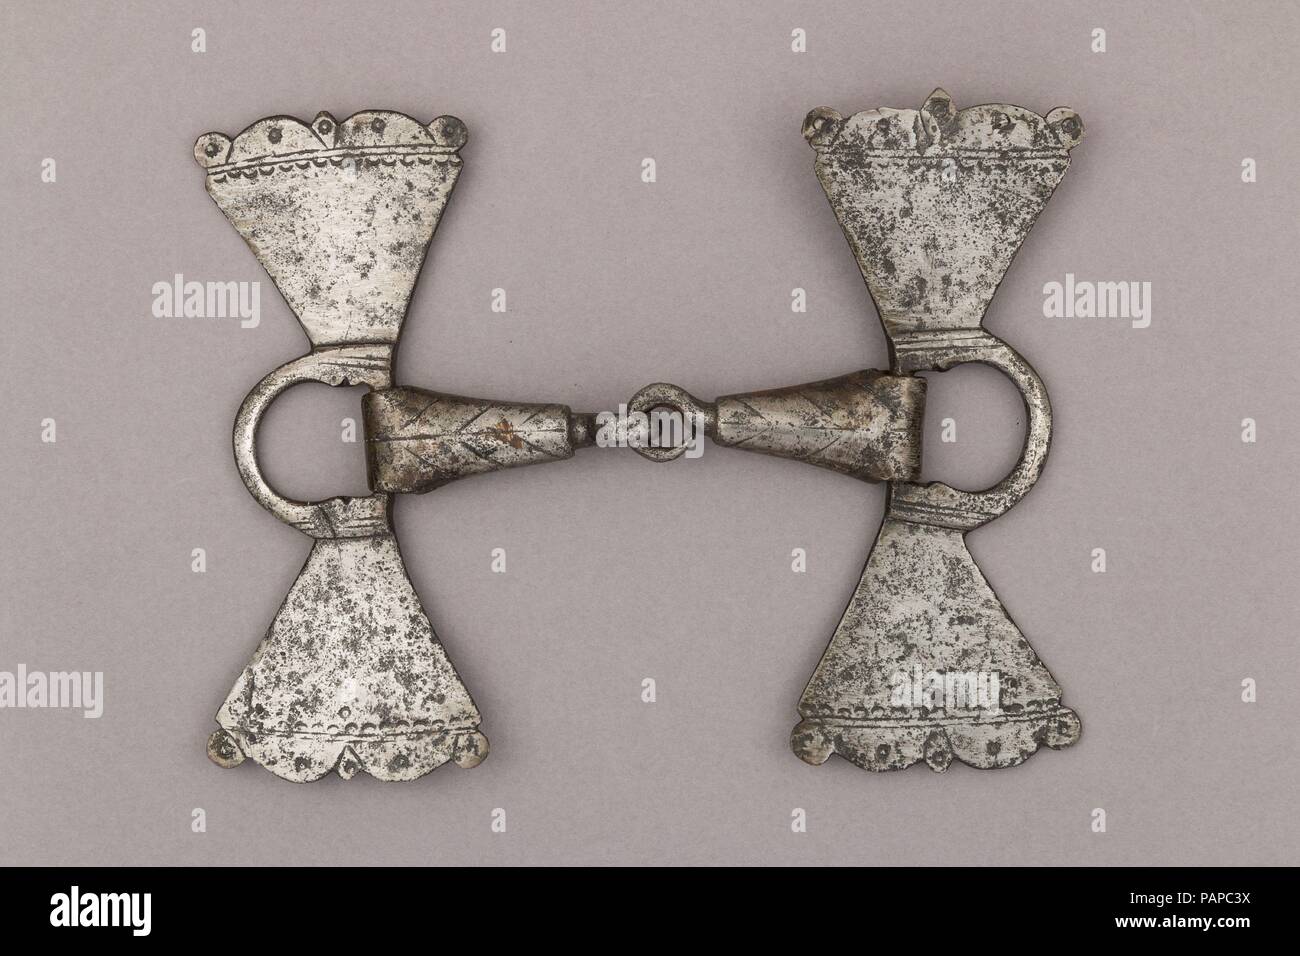 Snaffle Bit. Culture: German. Dimensions: H. 7 1/4 in. (18.42 cm); W. 9 5/16 in. (23.65 cm).. Date: late 16th century.  This kind of bit was used in the German lands for horses carrying litters and pulling sleighs.  The snaffle bit is the simplest type of horse bit, and it has an effect on the bars (part of the horses' jaw without teeth) and the corners of the lips. The scatches, the flattened triangular elements composing this mouthpiece, were slightly stronger in their effect and more resistant than the traditional conical canons also used at the time. The rings on the sides would serve to h Stock Photo